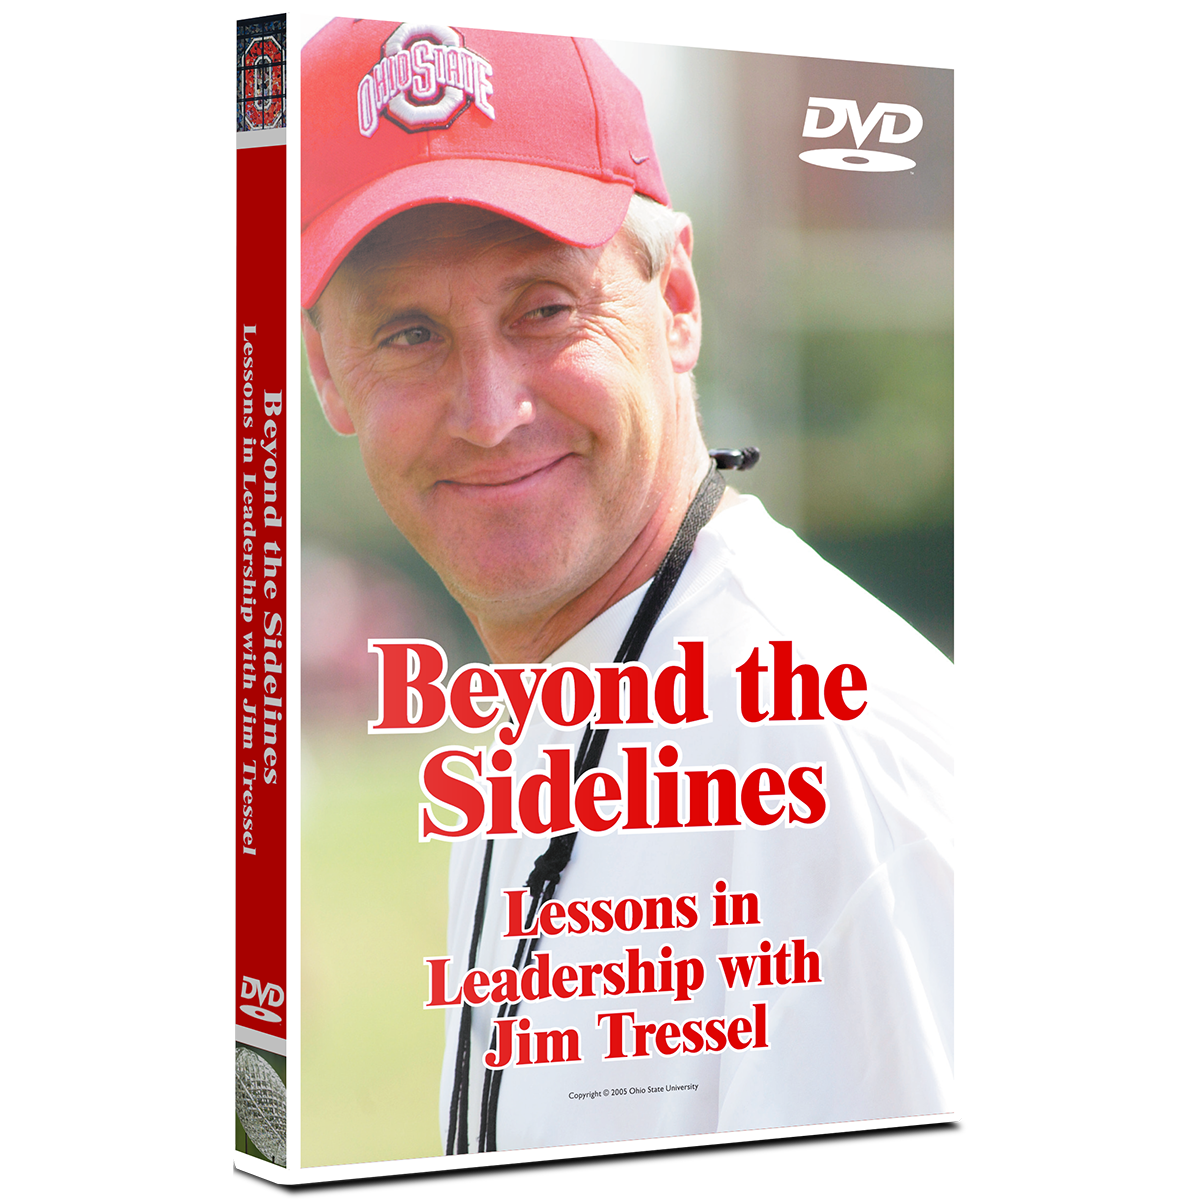 Beyond the Sidelines: Lessons in Leadership